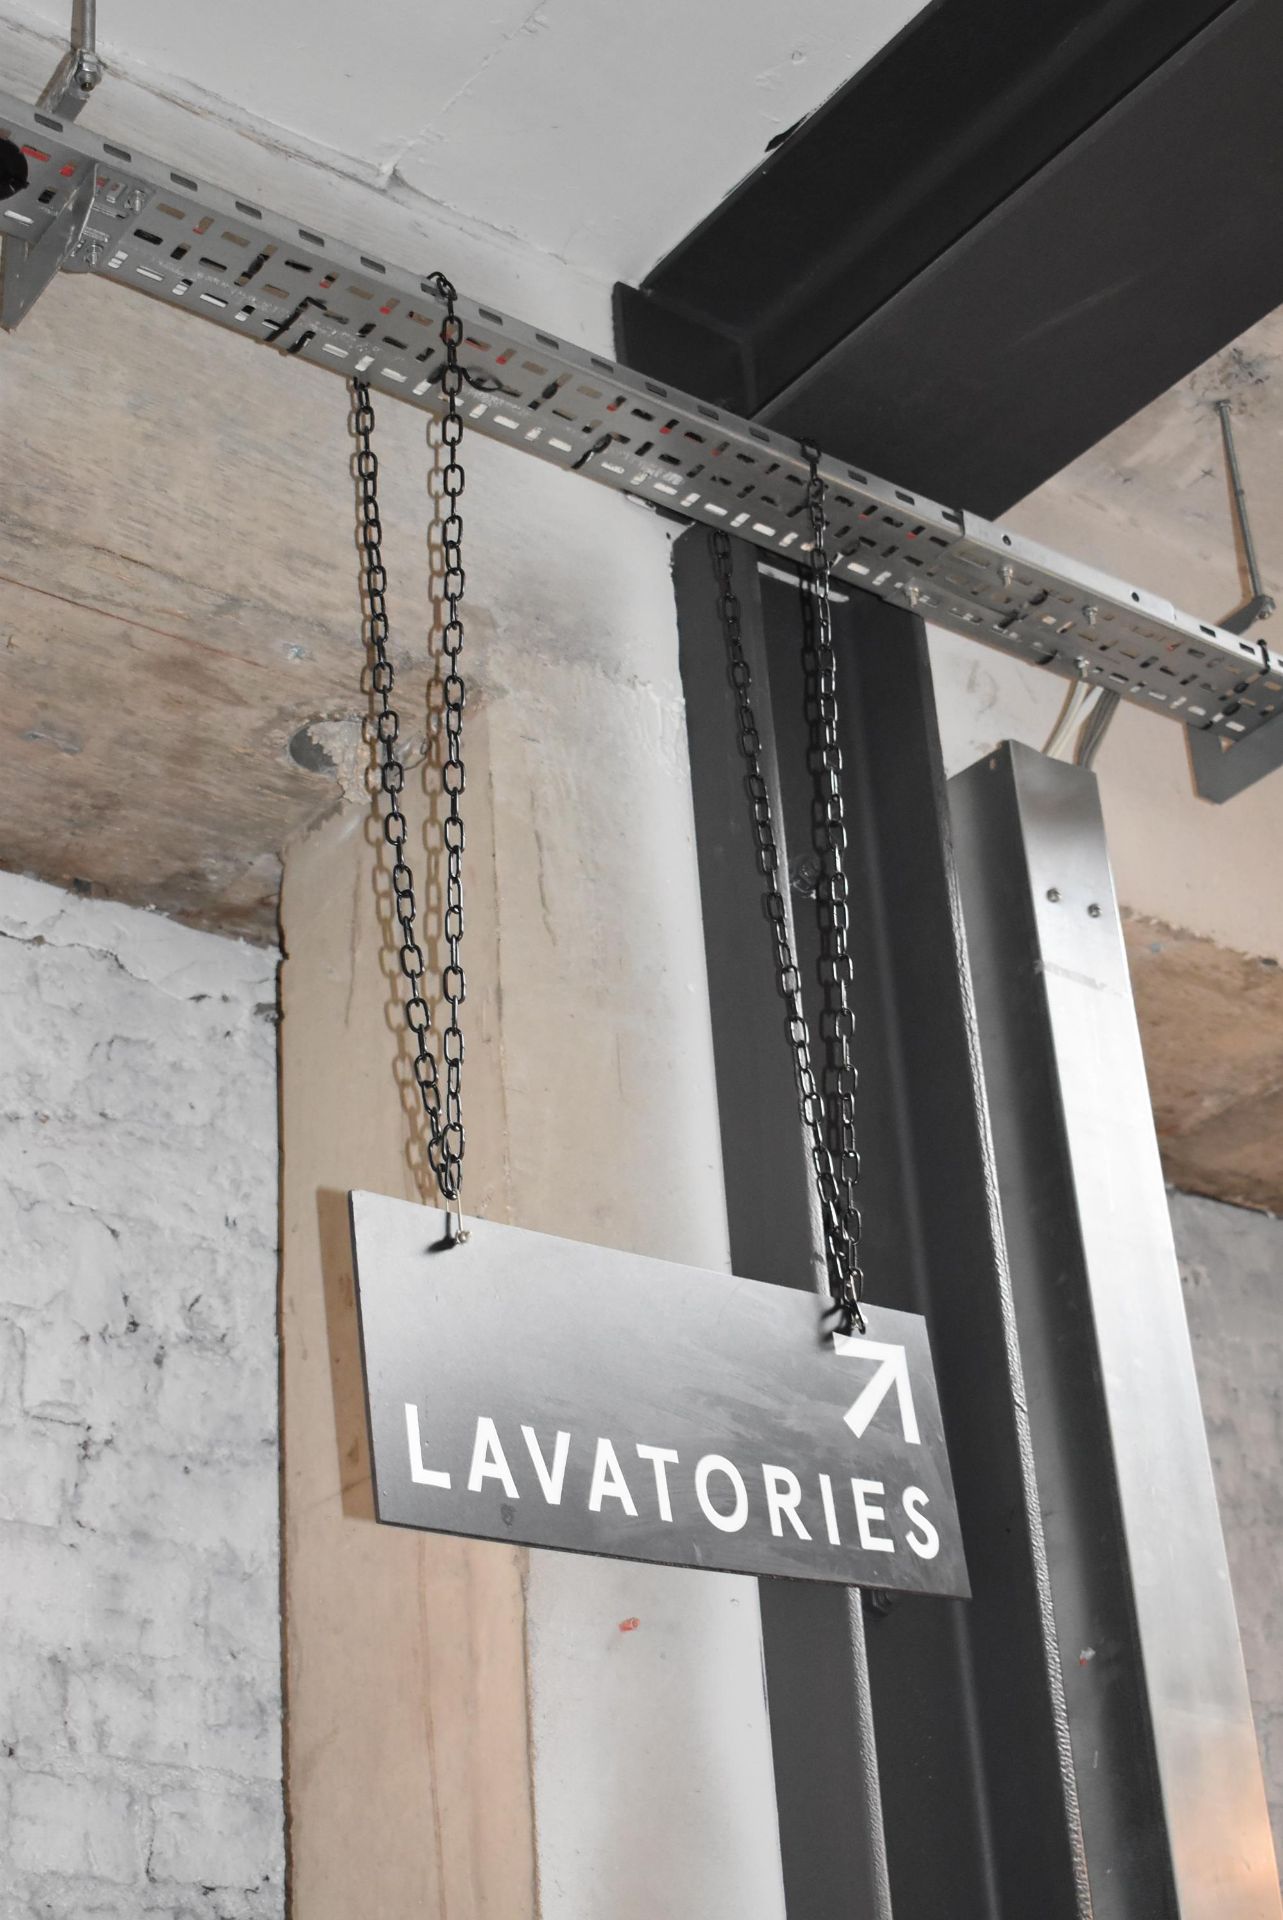 1 x Vintage Style Lavatories Toilet Sign With Hanging Chain - Image 3 of 3